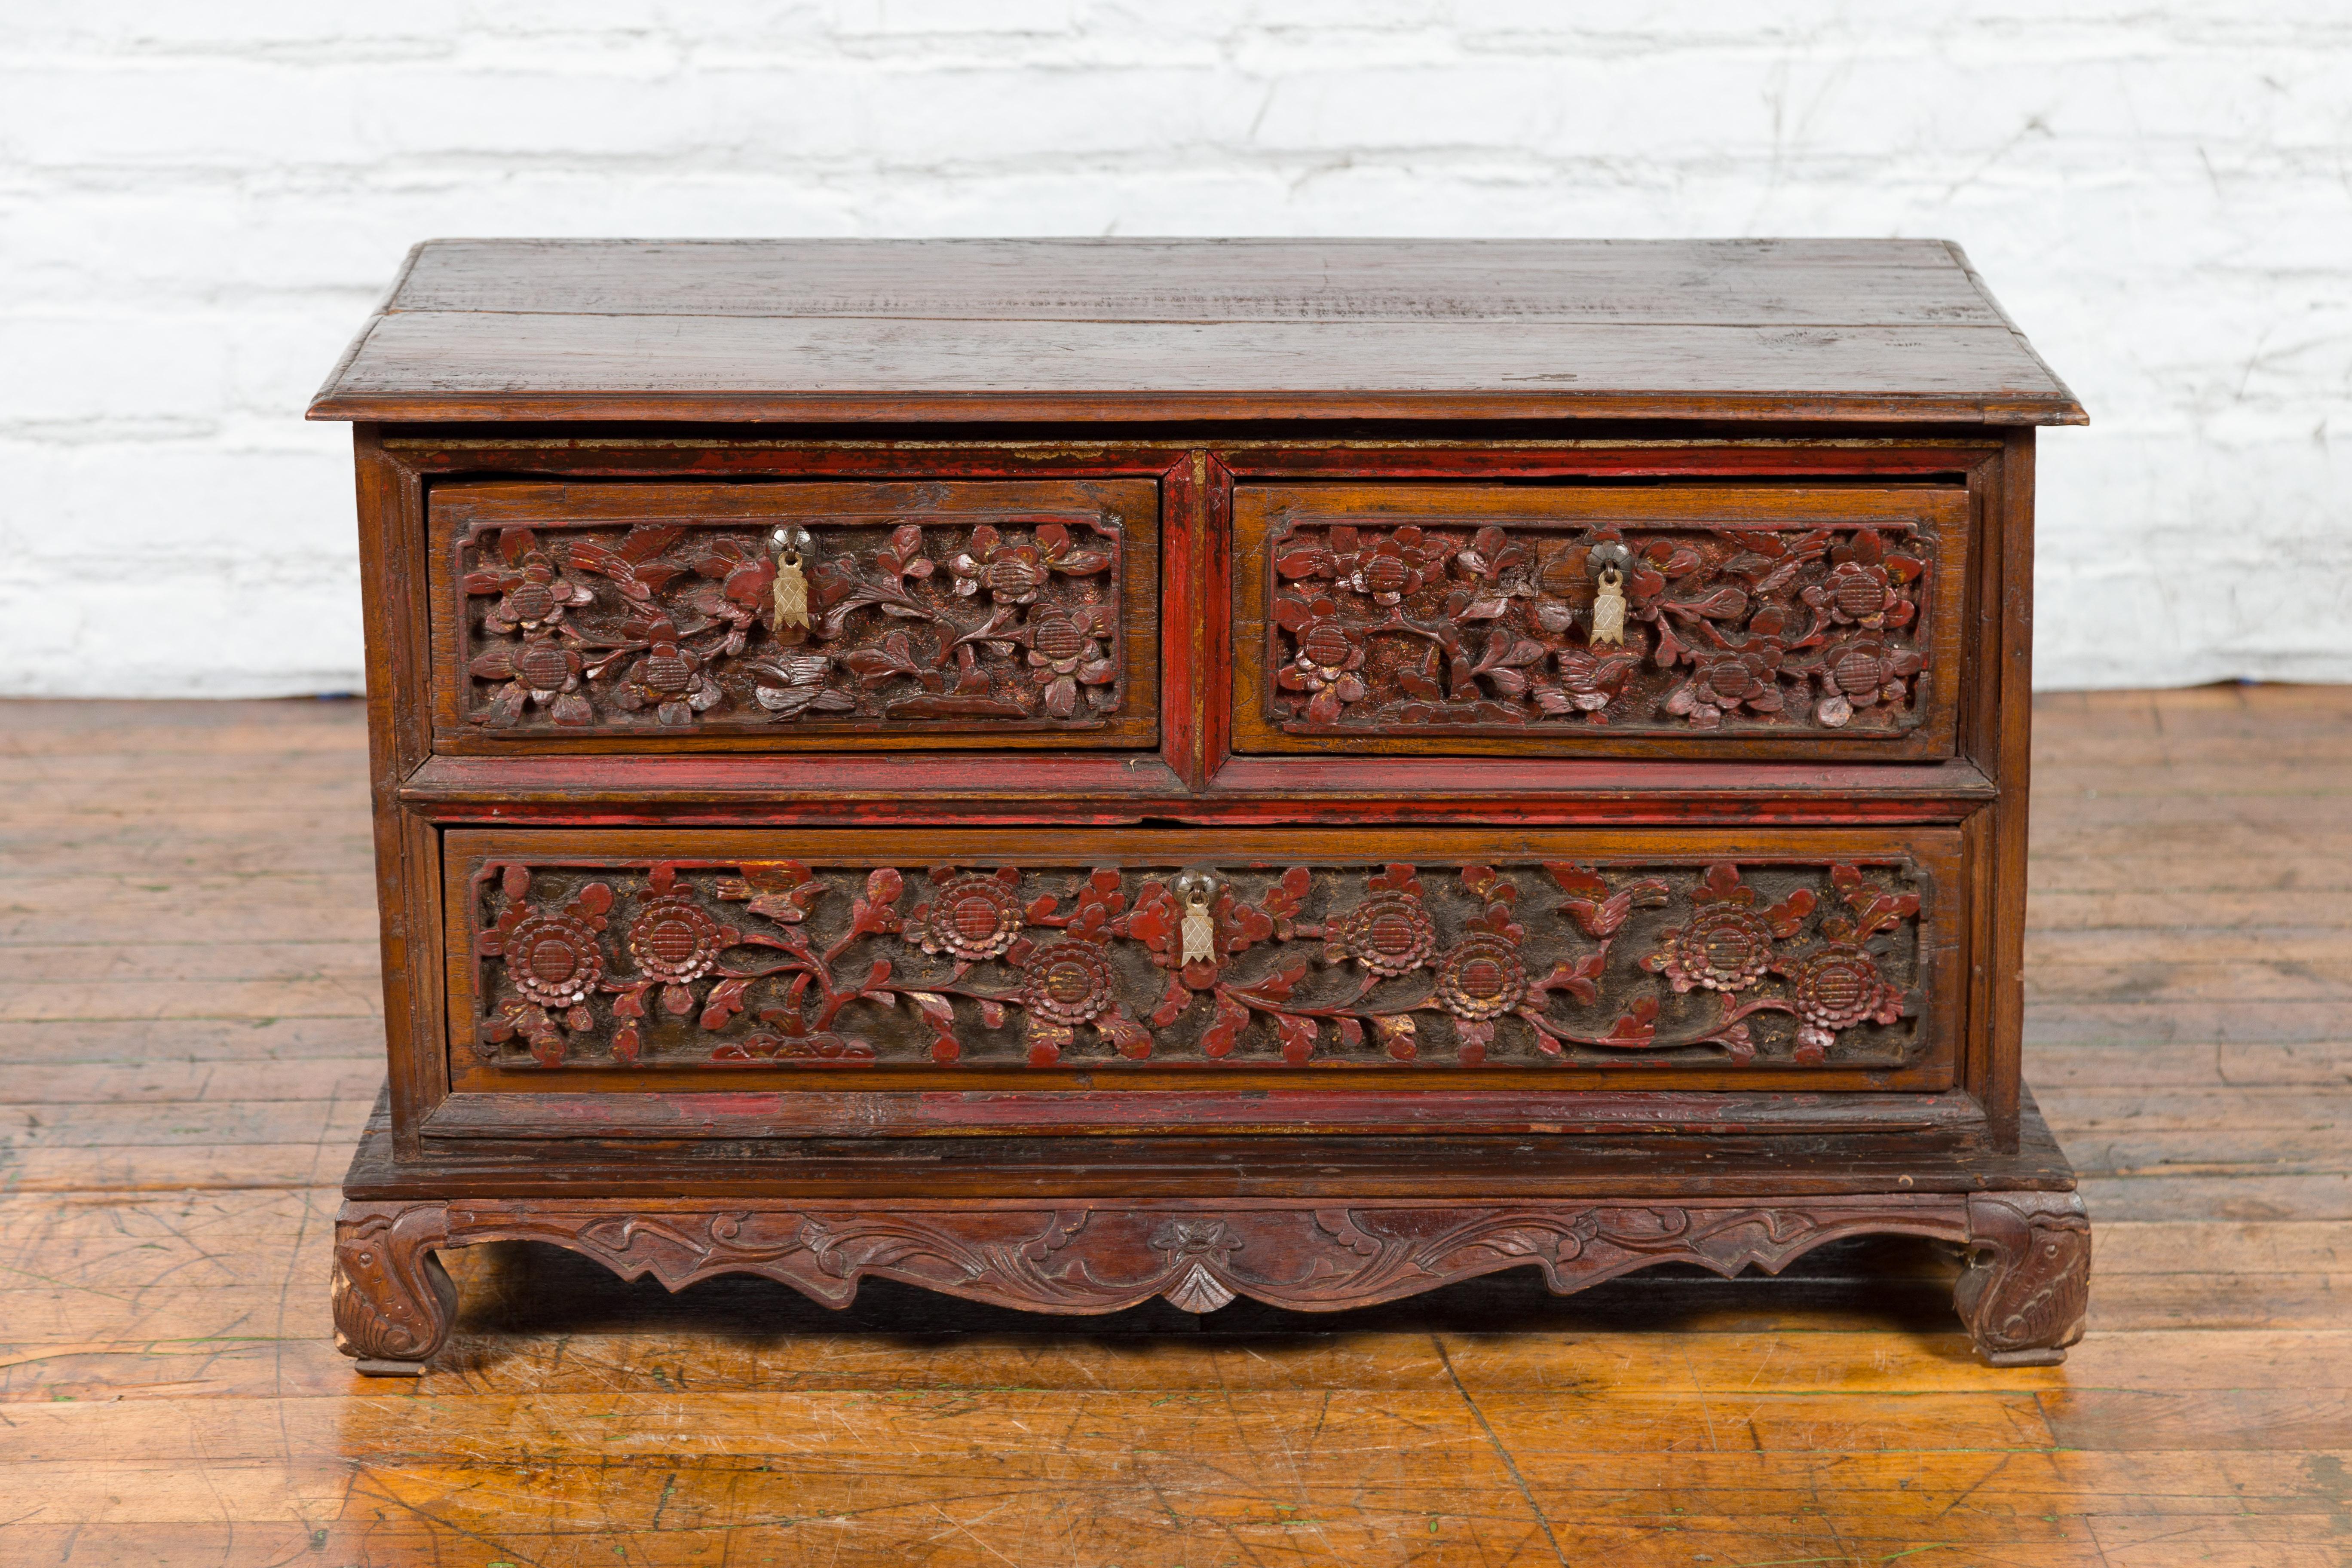 An antique Indonesian floral hand-carved wooden treasure chest from the early 20th century, with iron handles. Created on the island of Madura off of the northeastern coast of Java, this treasure chest features a rectangular planked top with beveled